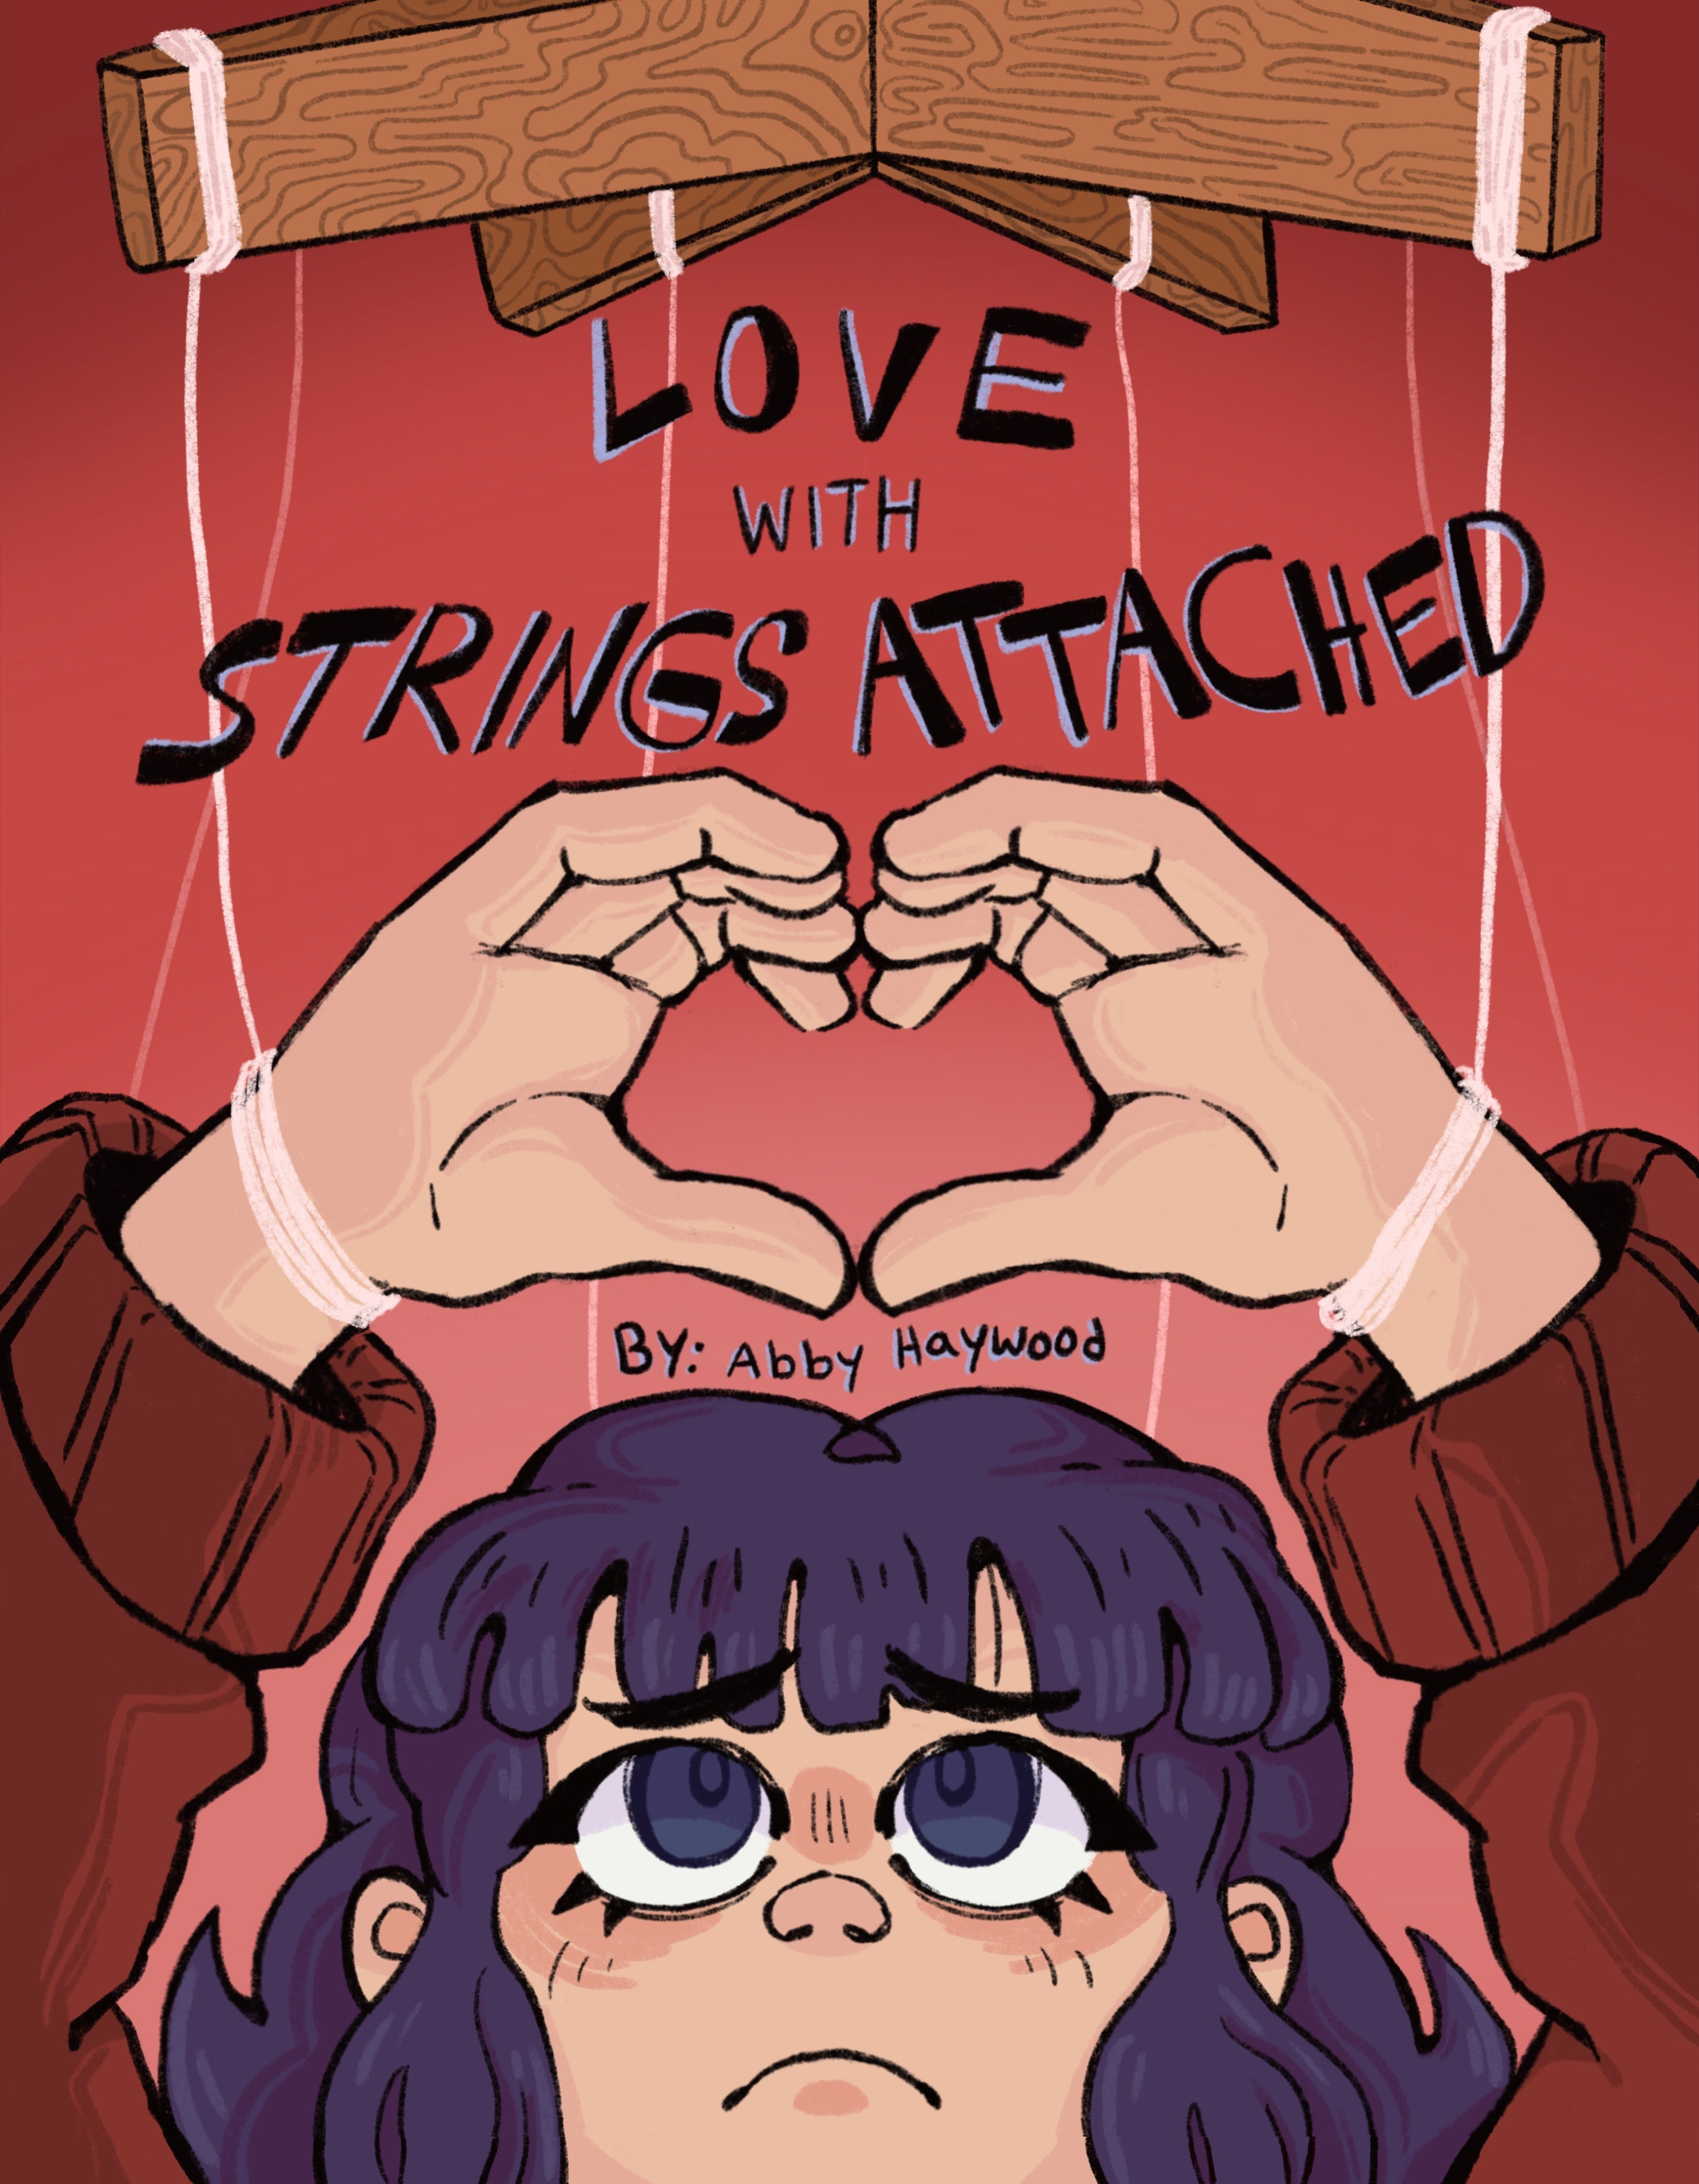 Love with Strings Attached Zine